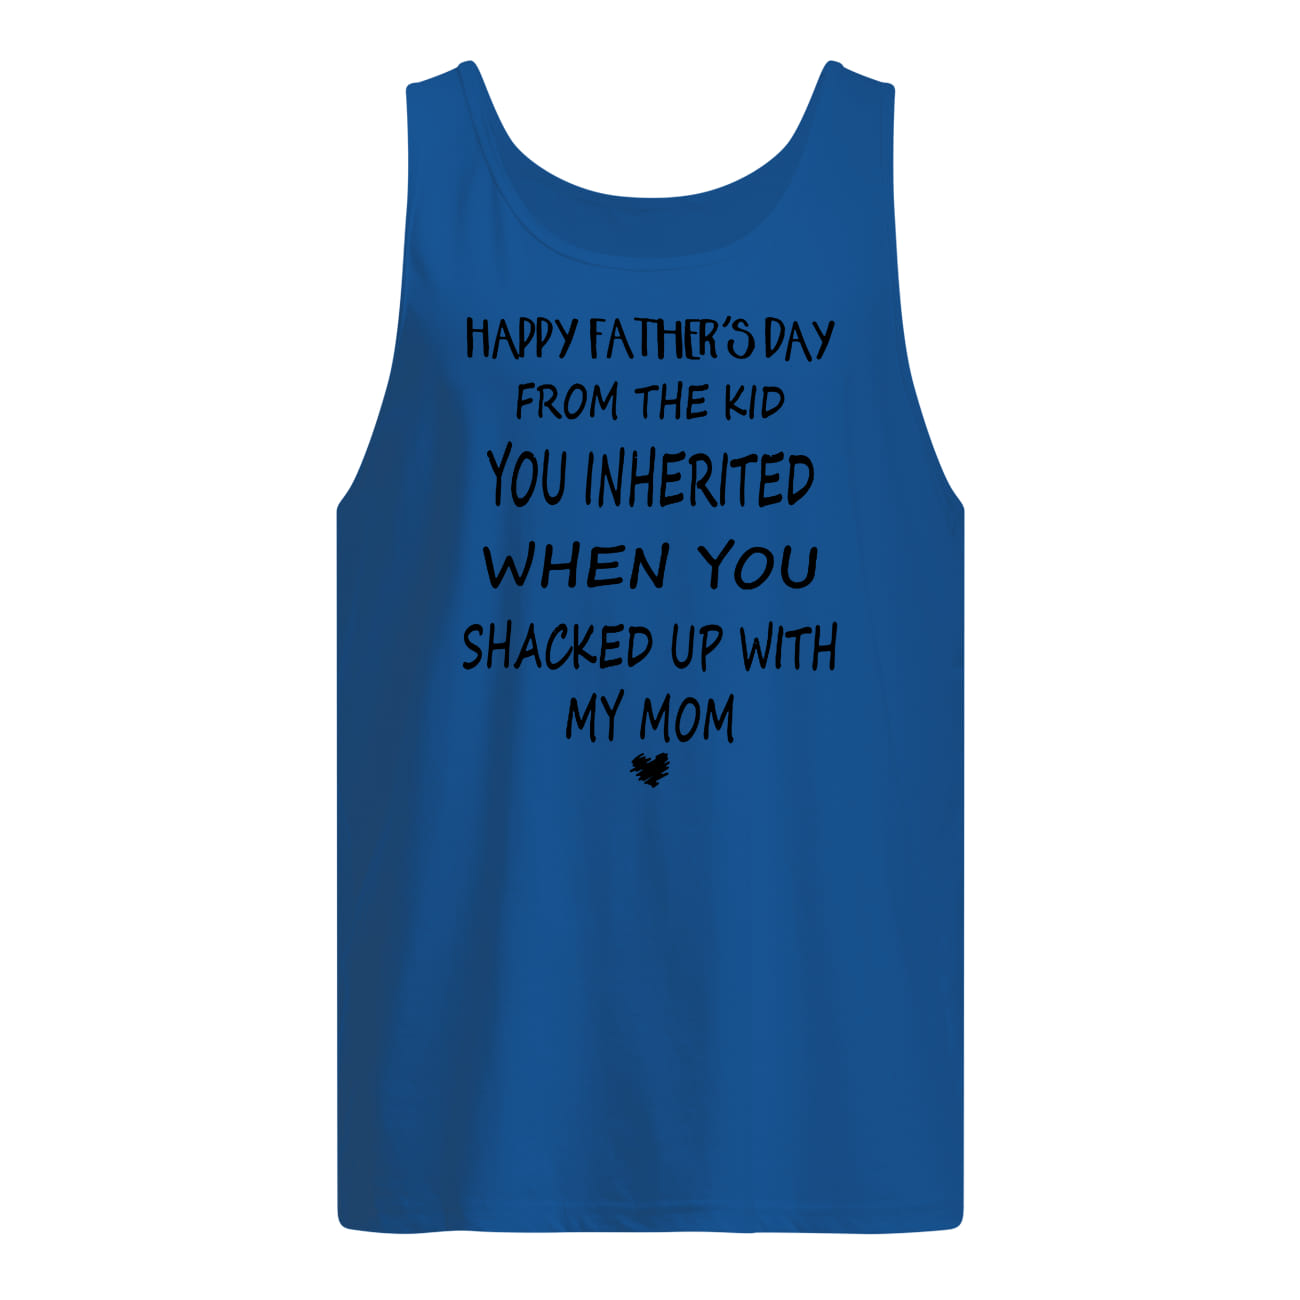 Happy father's day from the kid you inherited when you shacked with my mom tank top